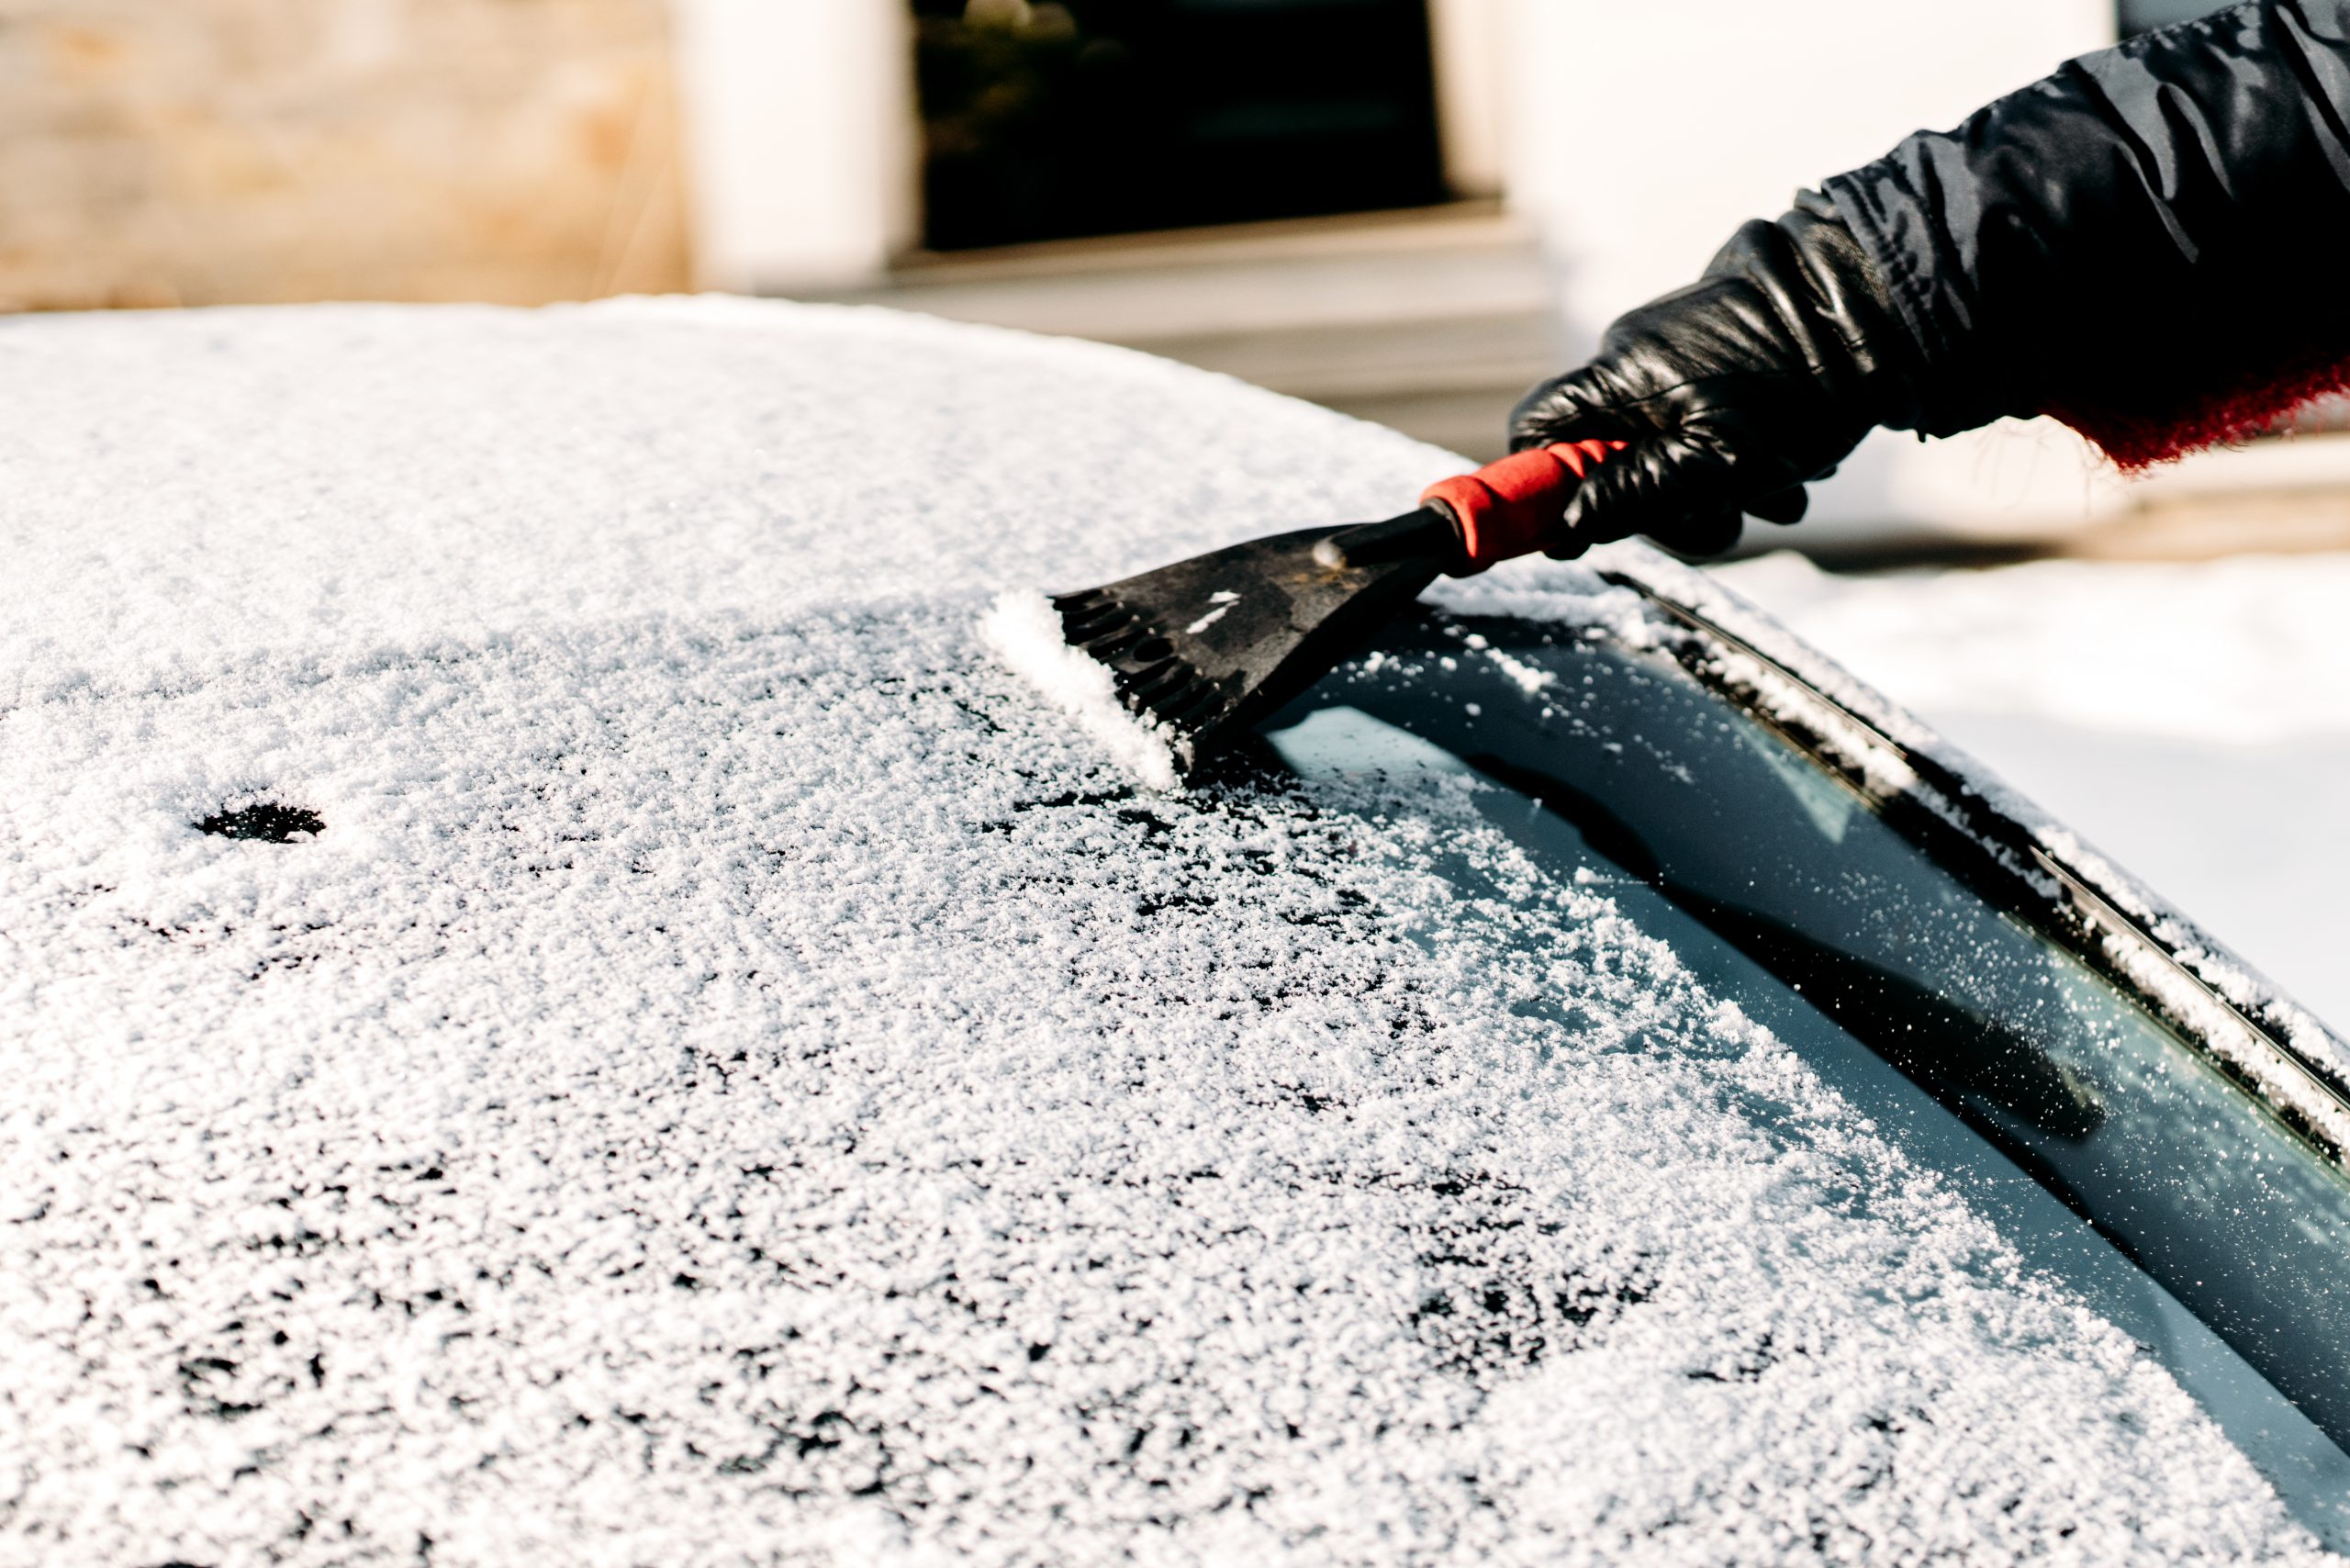 Increase Car Security this winter